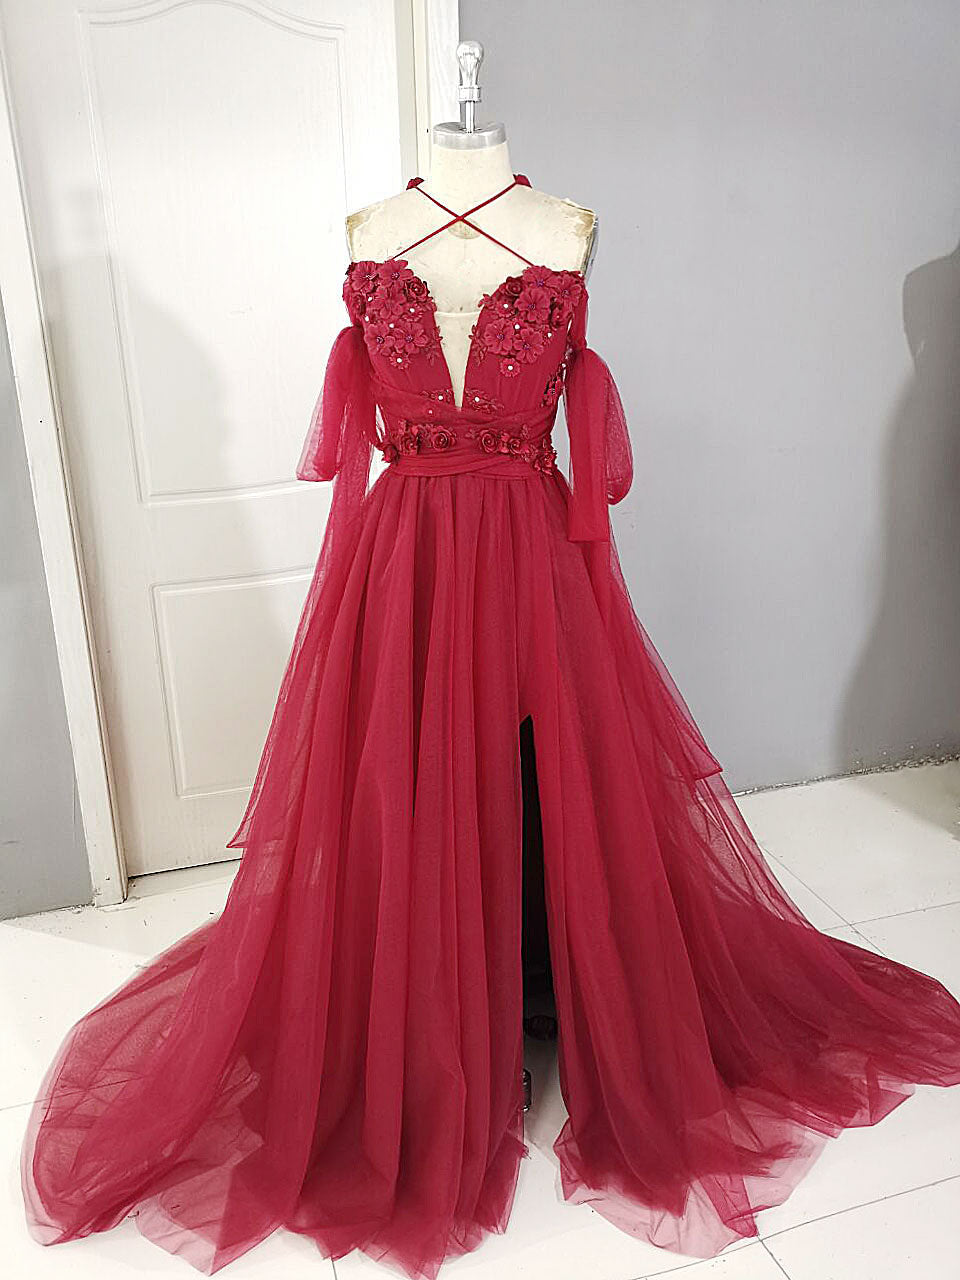 Princess Prom Dress, Dark Red Tulle Lace Long Prom Dress, Red Tulle Lace Evening Dress